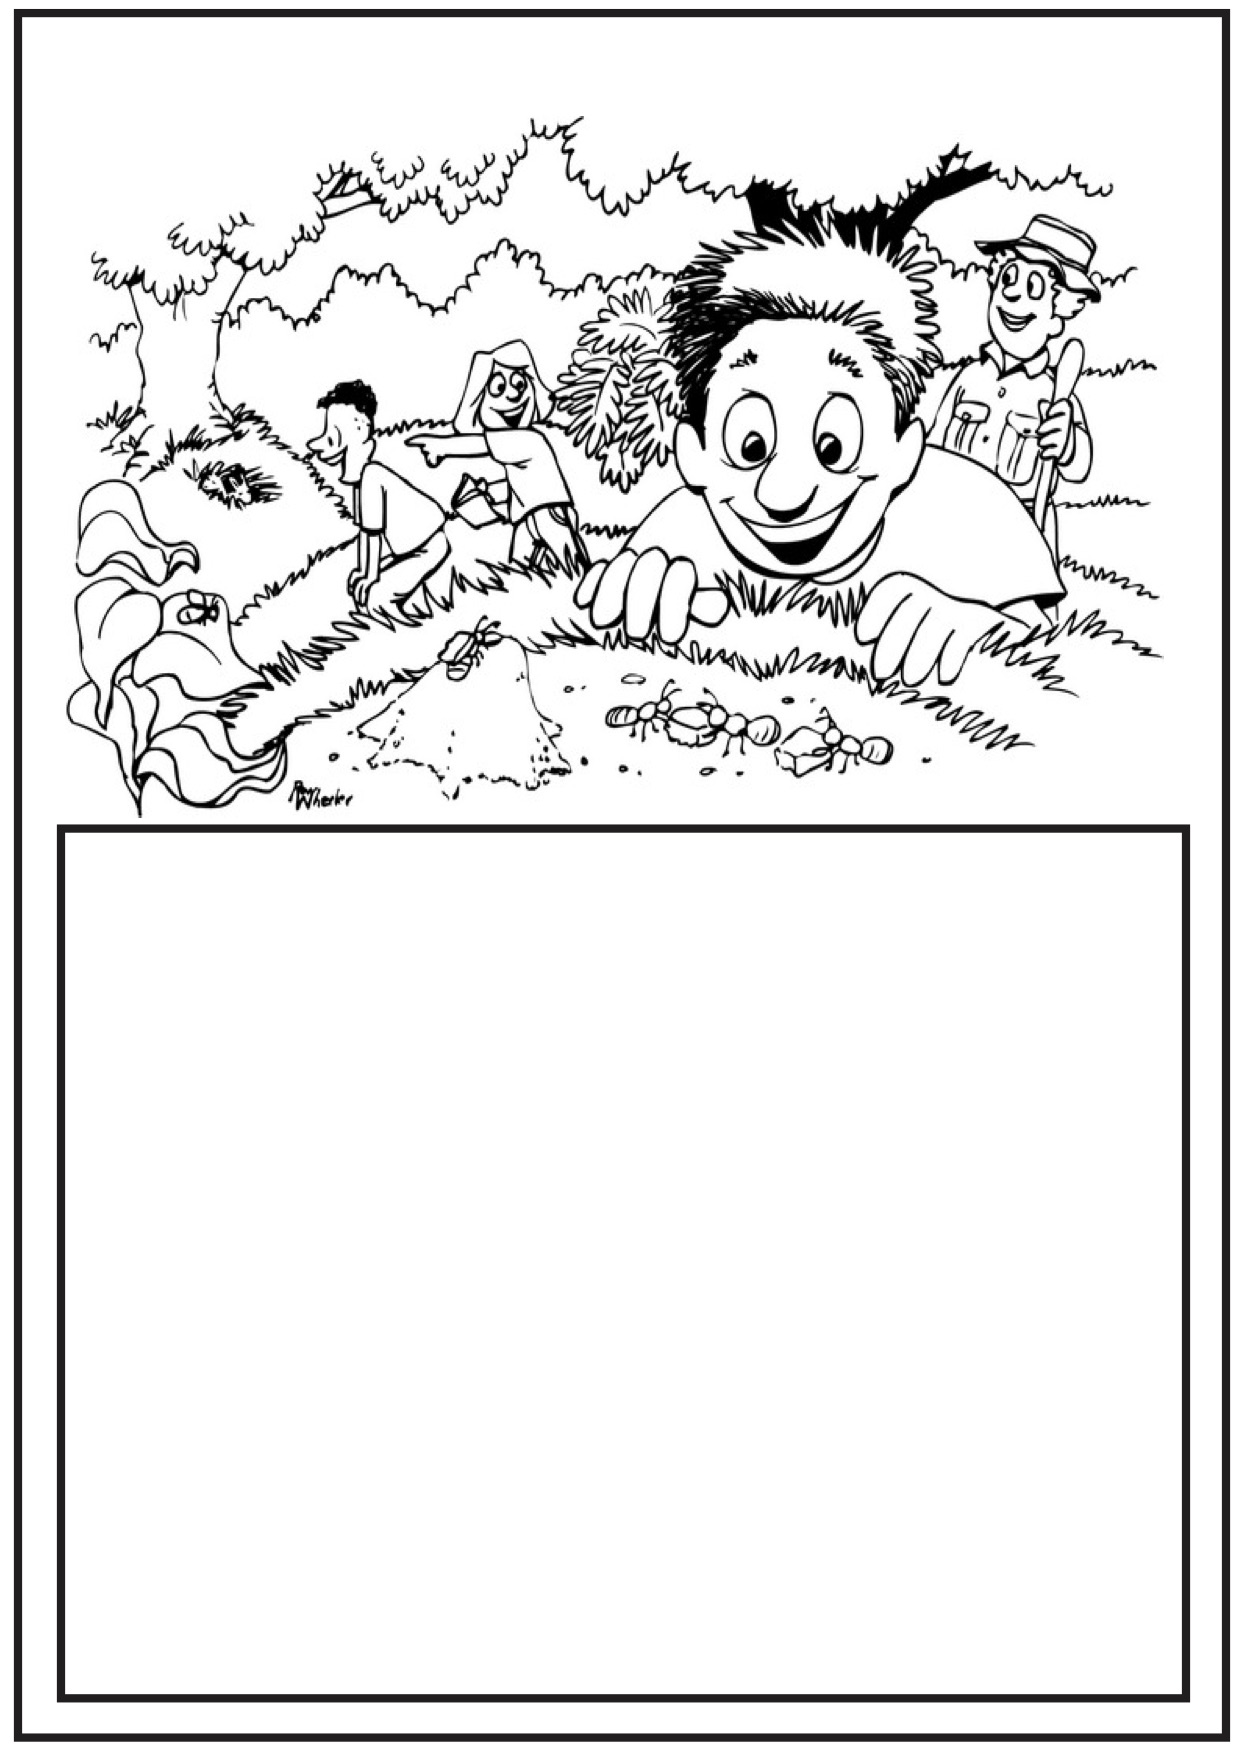 drawing-and-colouring-worksheets-pdf-make-your-world-more-colorful-with-printable-coloring